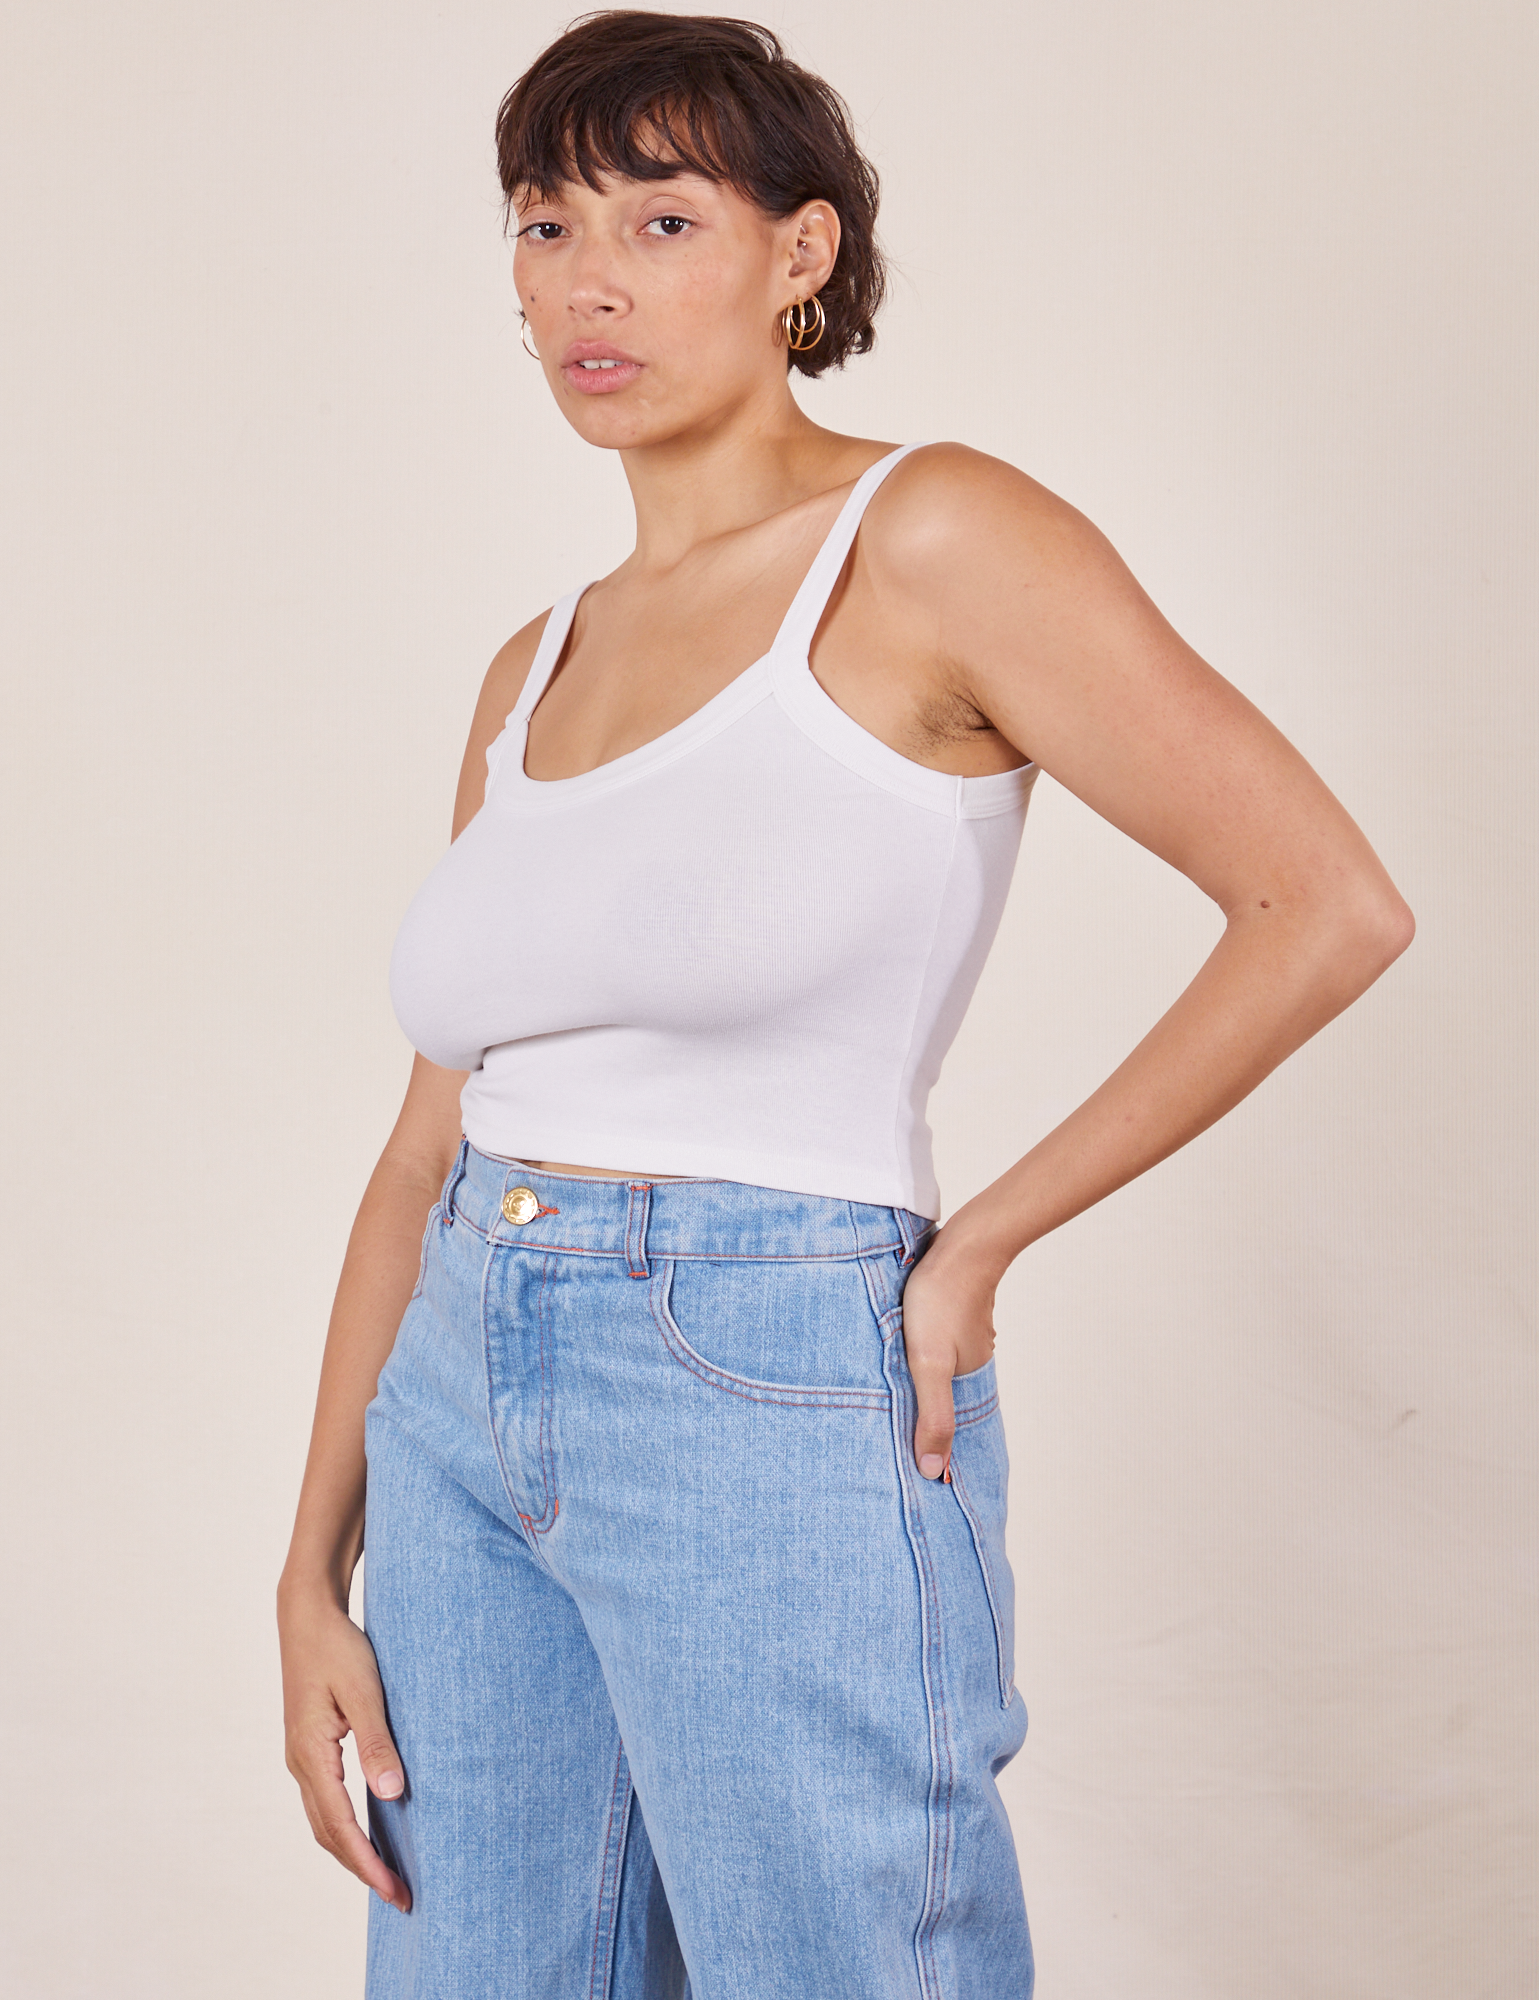 Tiara is 5&#39;4&quot; and wearing XS Cropped Cami in Vintage Off-White paired with light wash Sailor Jeans